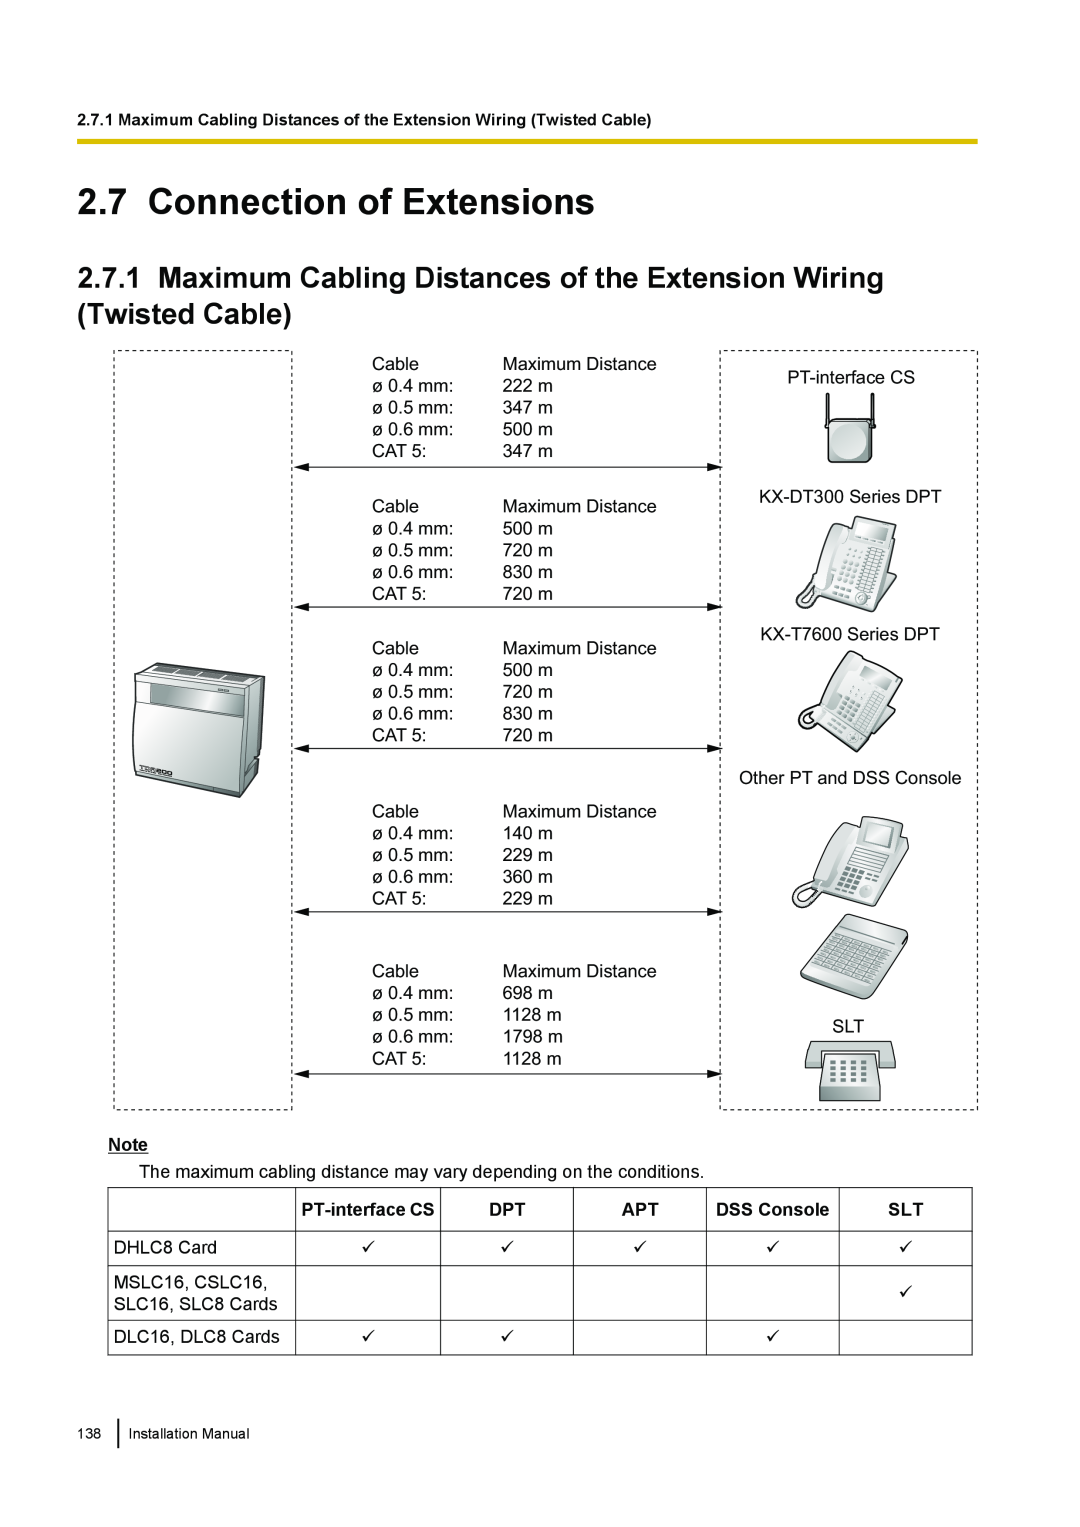 Panasonic KX-TDA100 Connection of Extensions, Maximum Cabling Distances of the Extension Wiring Twisted Cable, DSS Console 